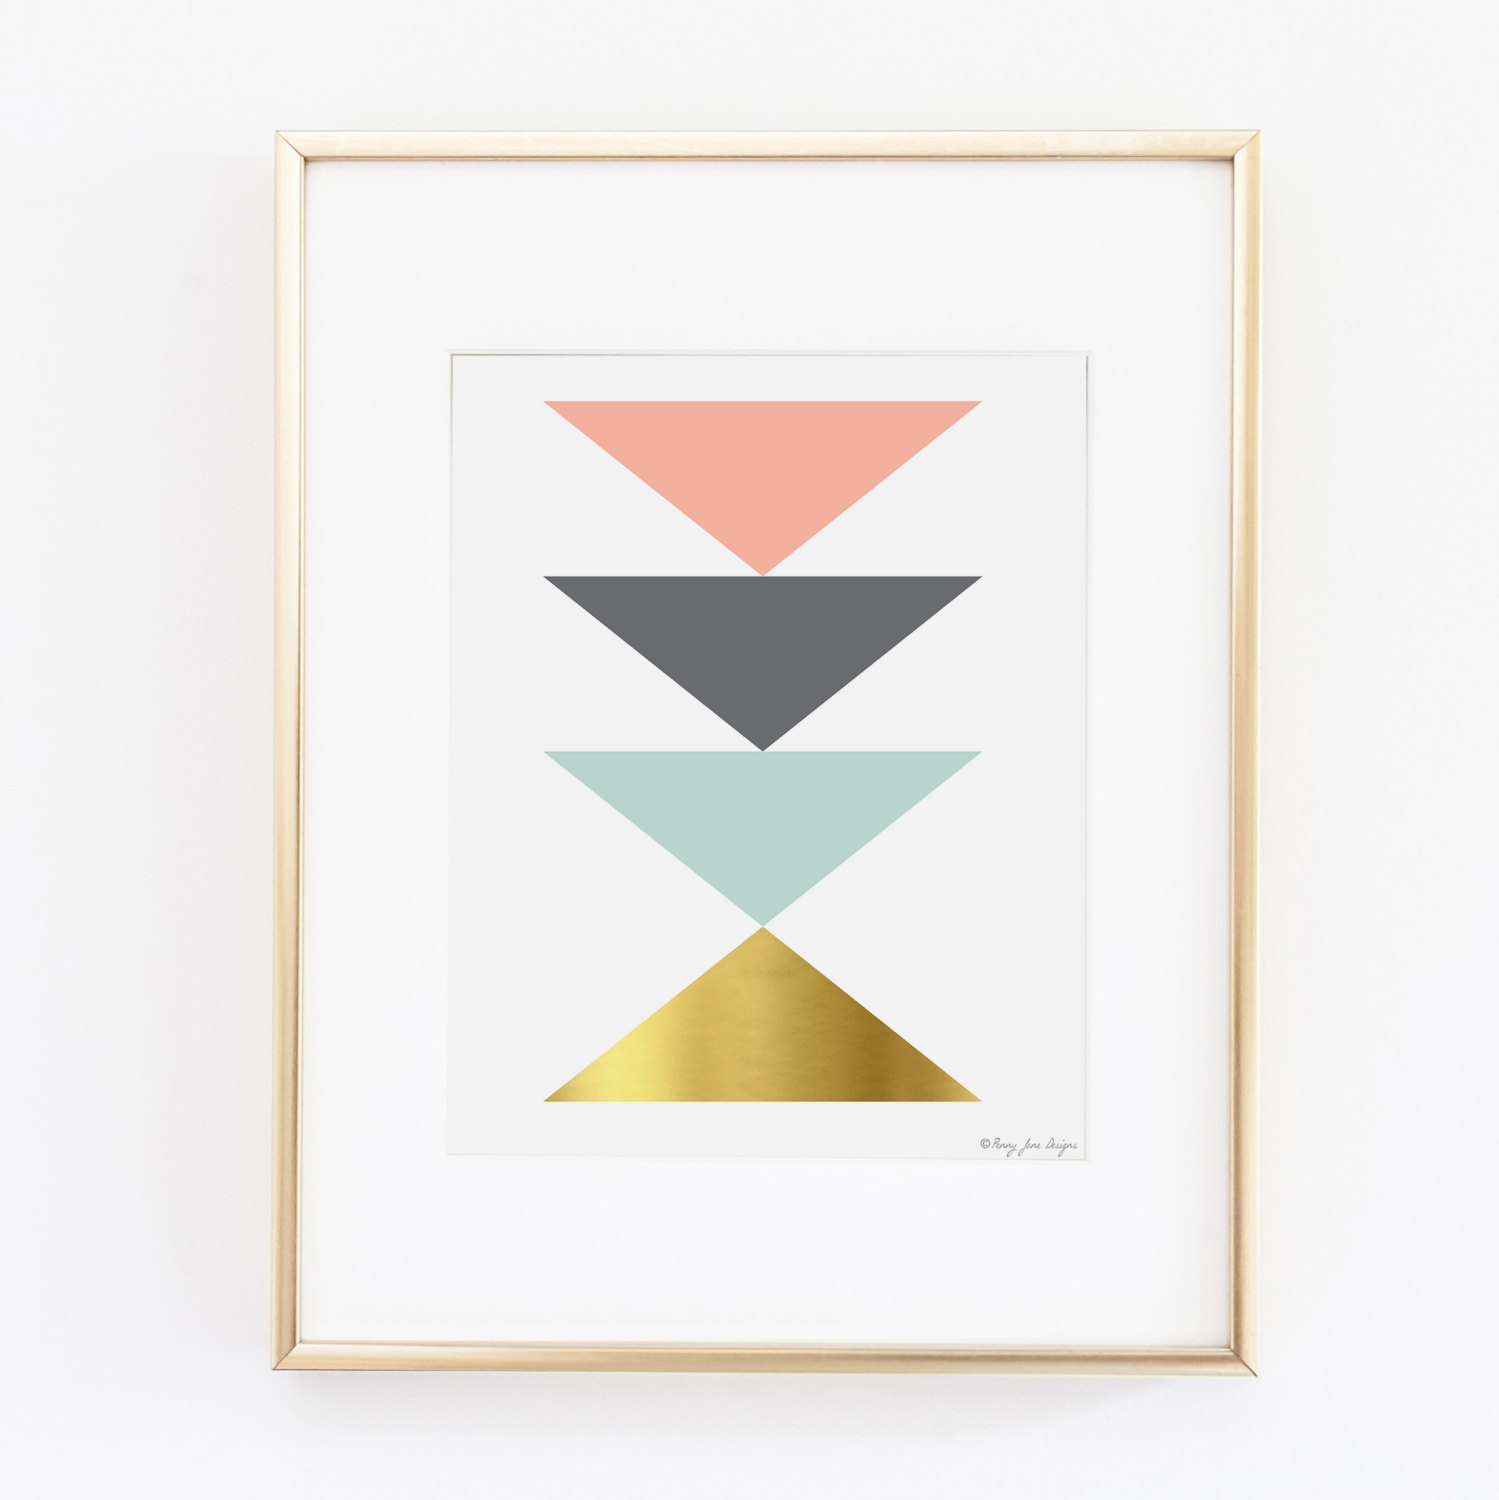 Geometric Triangle Art Print from Penny Jane Design on Etsy